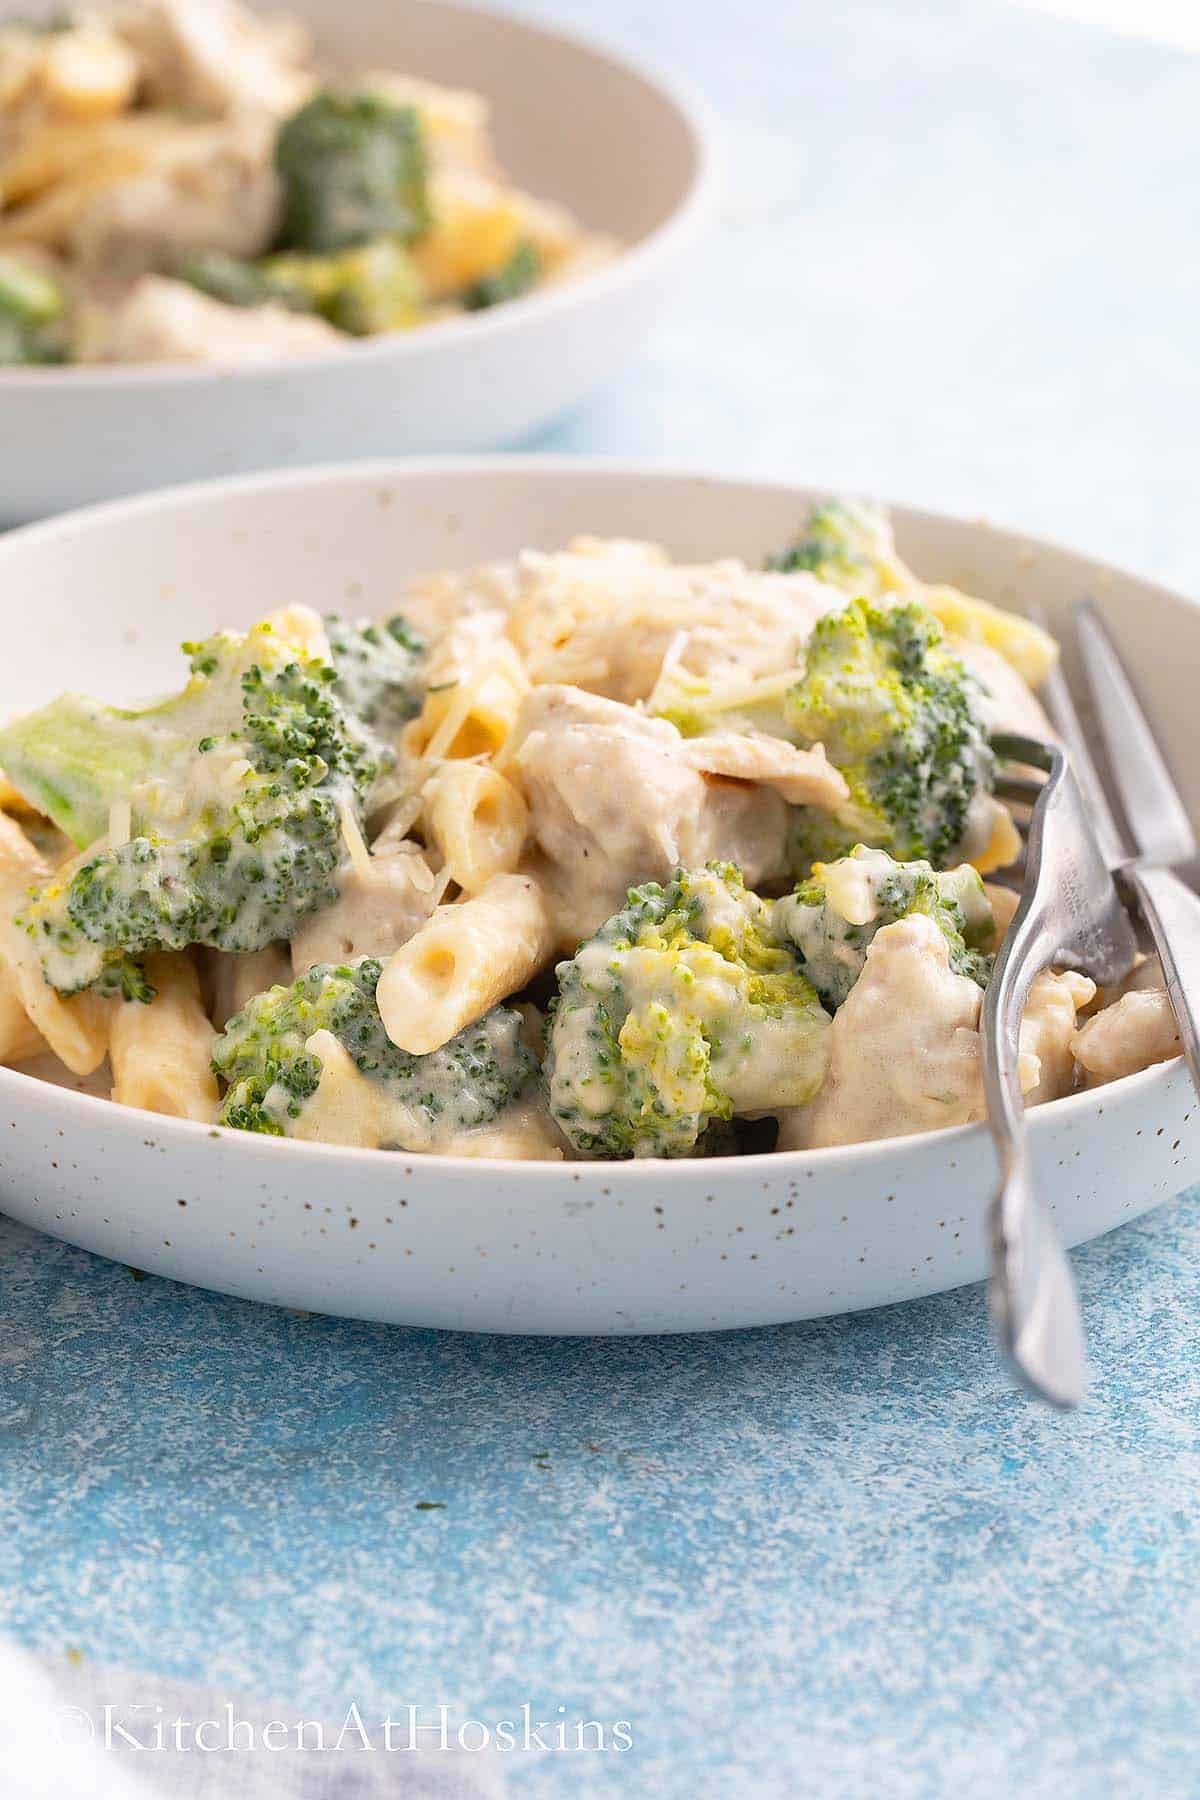 white plate with cooked pasta, chicken, broccoli and two forks.